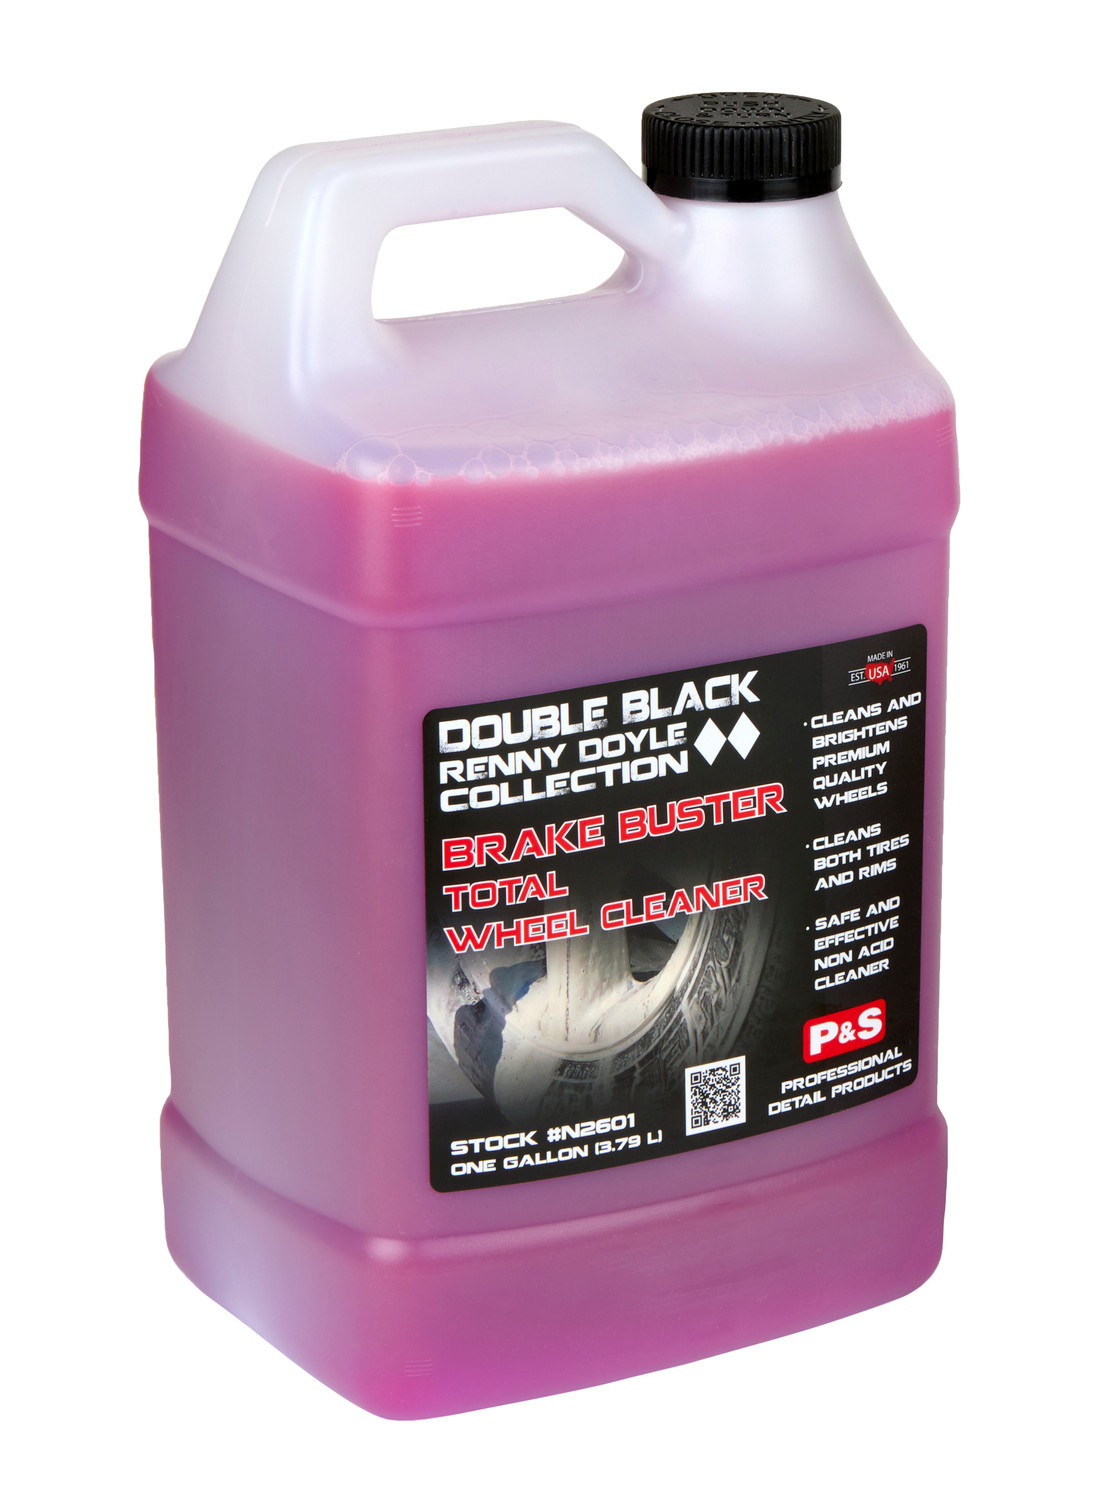 P&S Brake Buster Non-Acid Foaming Wheel Cleaner 16oz w/ corrosion  inhibitors